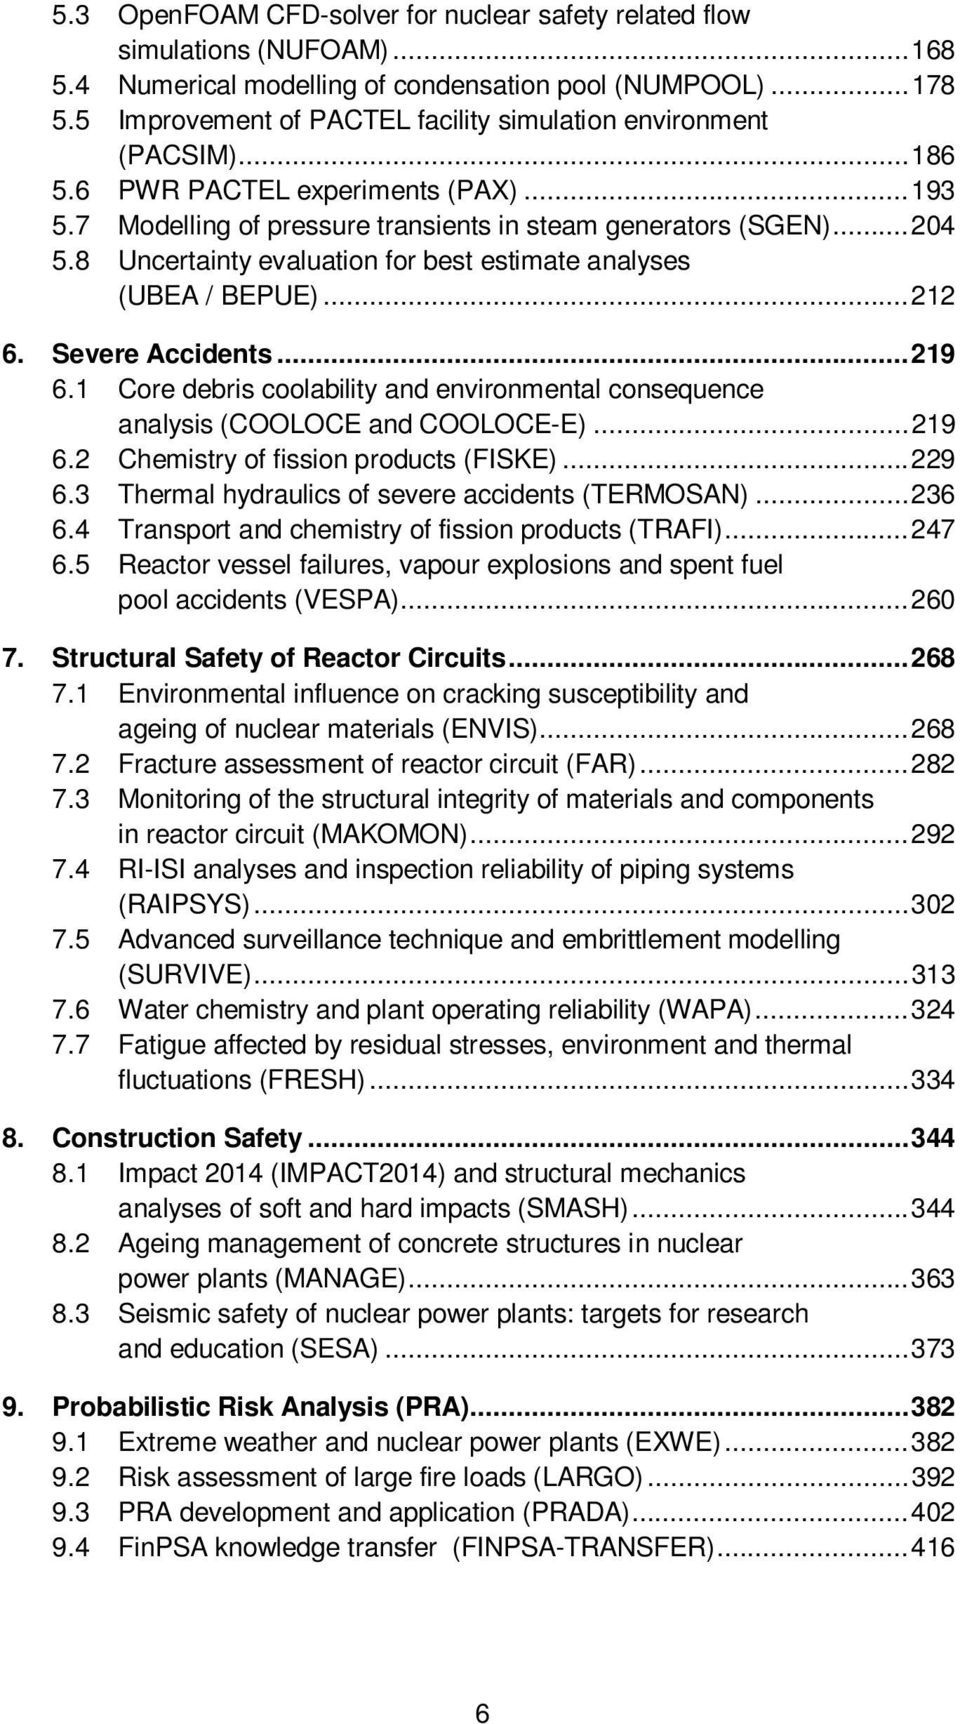 8 Uncertainty evaluation for best estimate analyses (UBEA / BEPUE)... 212 6. Severe Accidents... 219 6.1 Core debris coolability and environmental consequence analysis (COOLOCE and COOLOCE-E)... 219 6.2 Chemistry of fission products (FISKE).